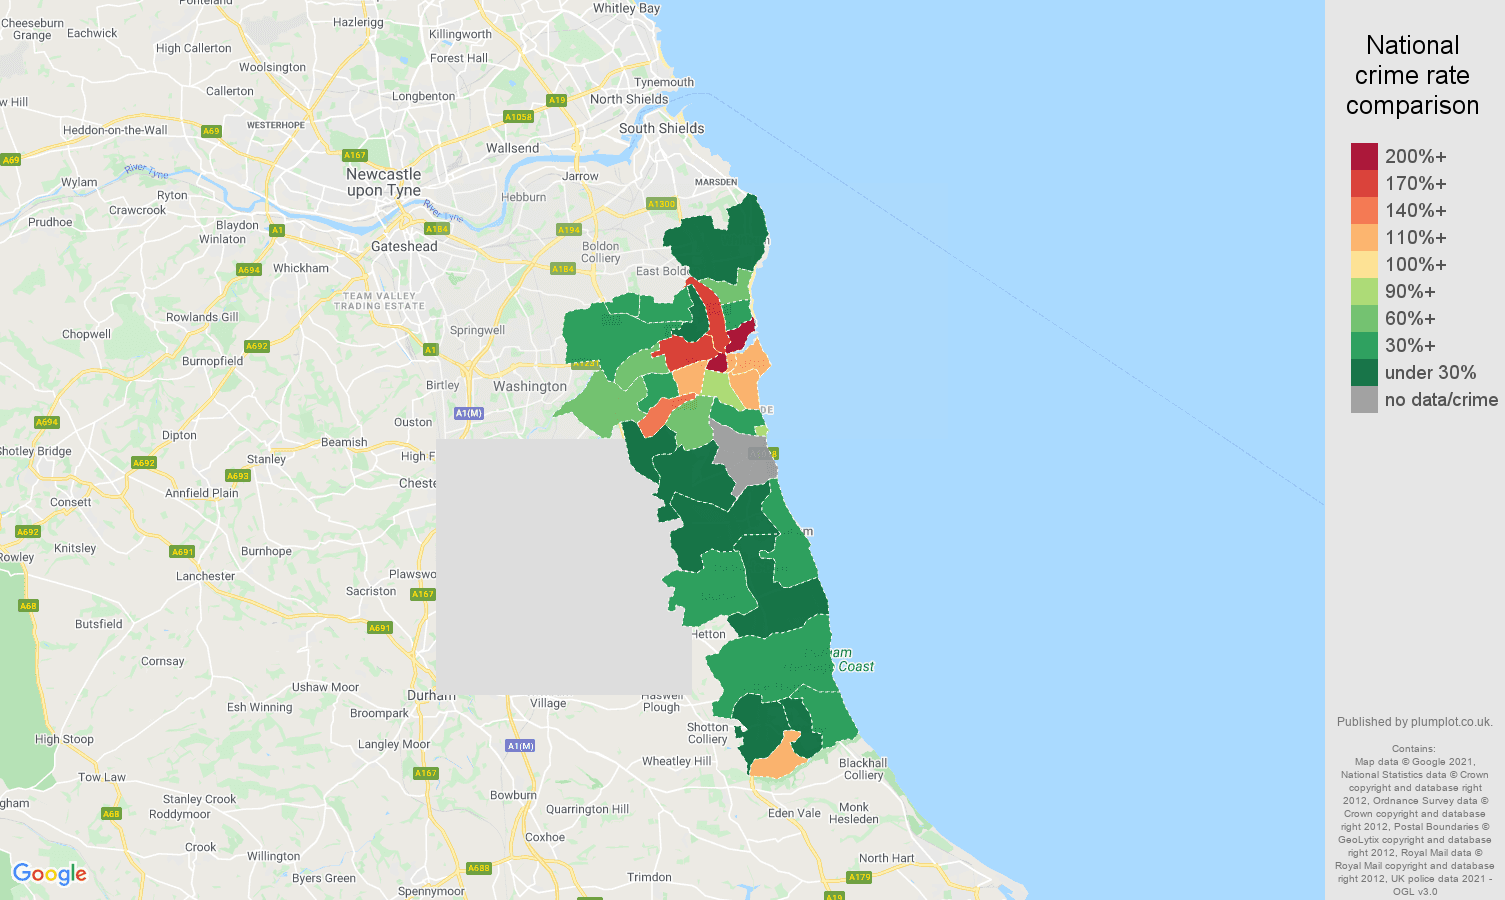 Sunderland bicycle theft crime rate comparison map